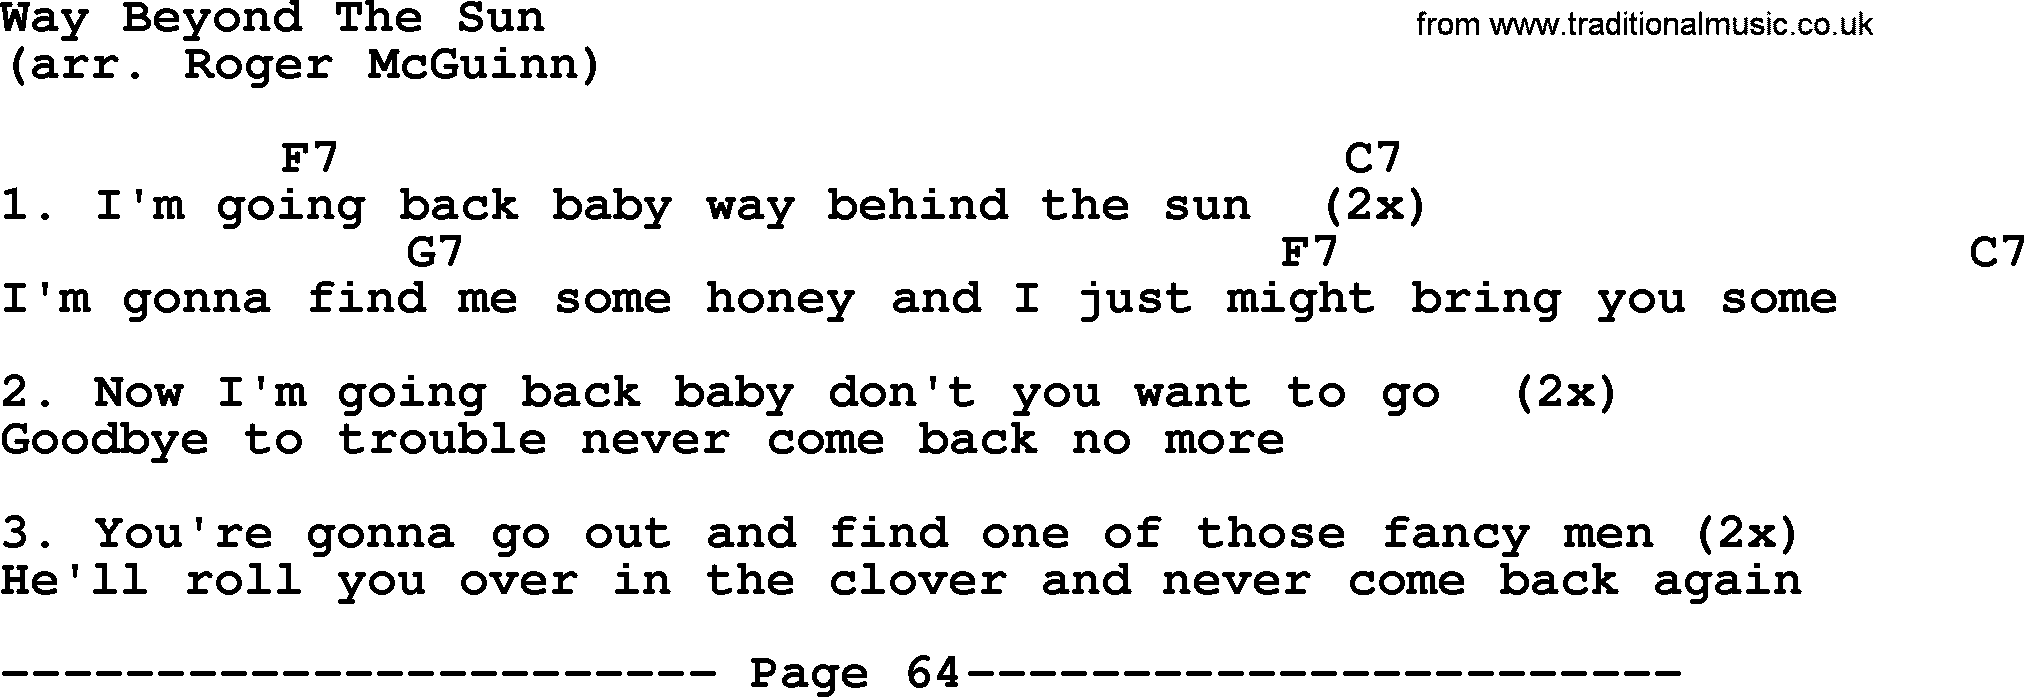 The Byrds song Way Beyond The Sun, lyrics and chords